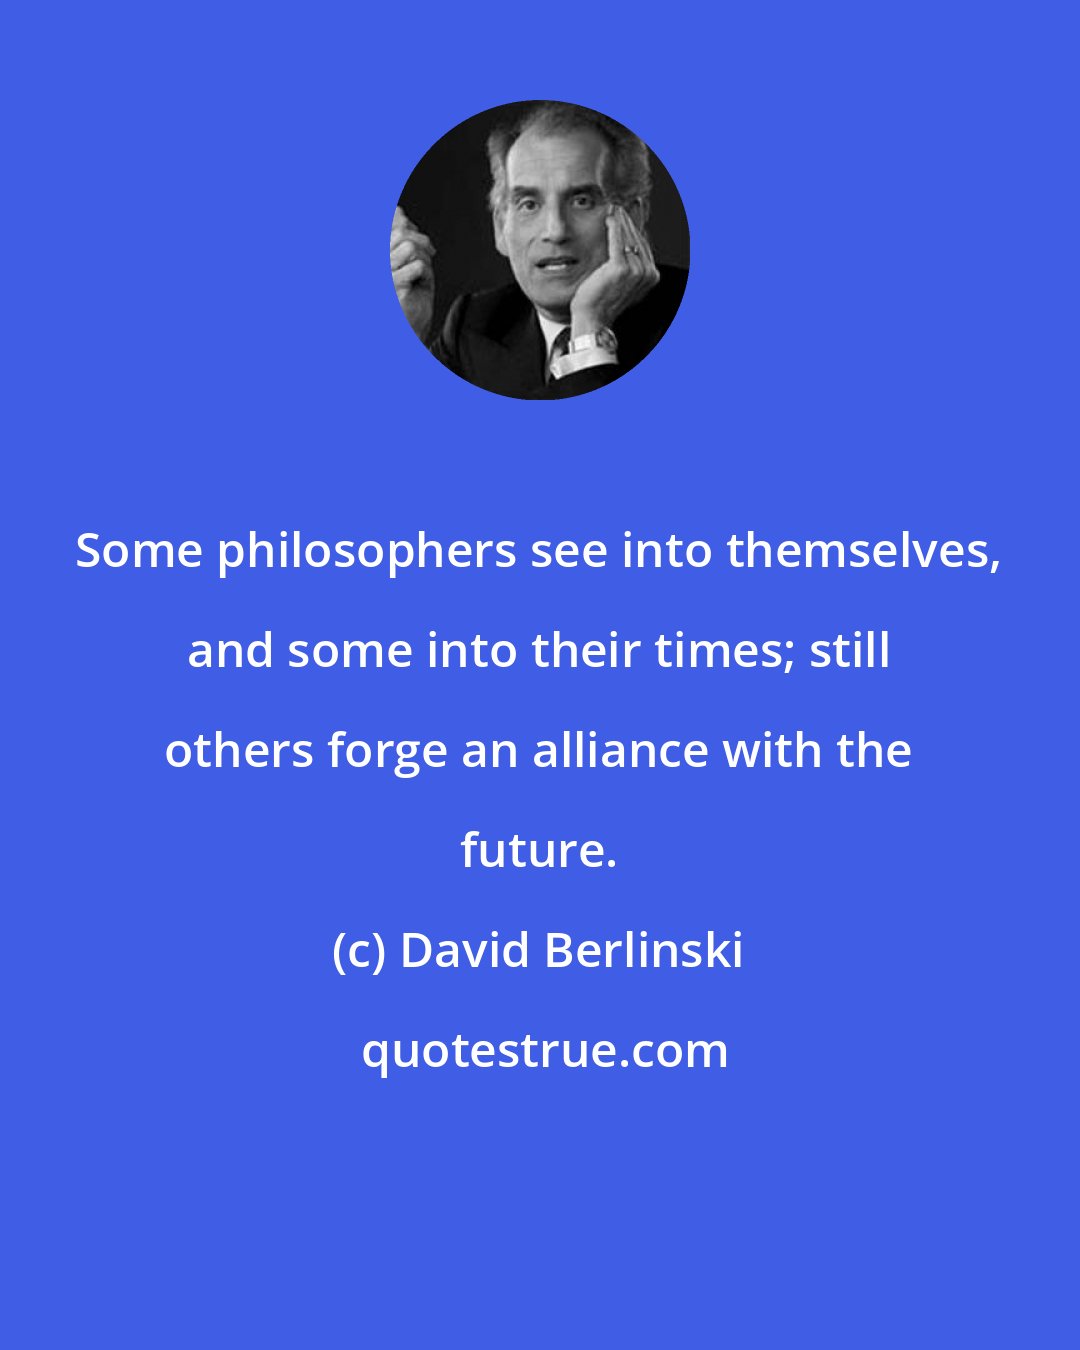 David Berlinski: Some philosophers see into themselves, and some into their times; still others forge an alliance with the future.